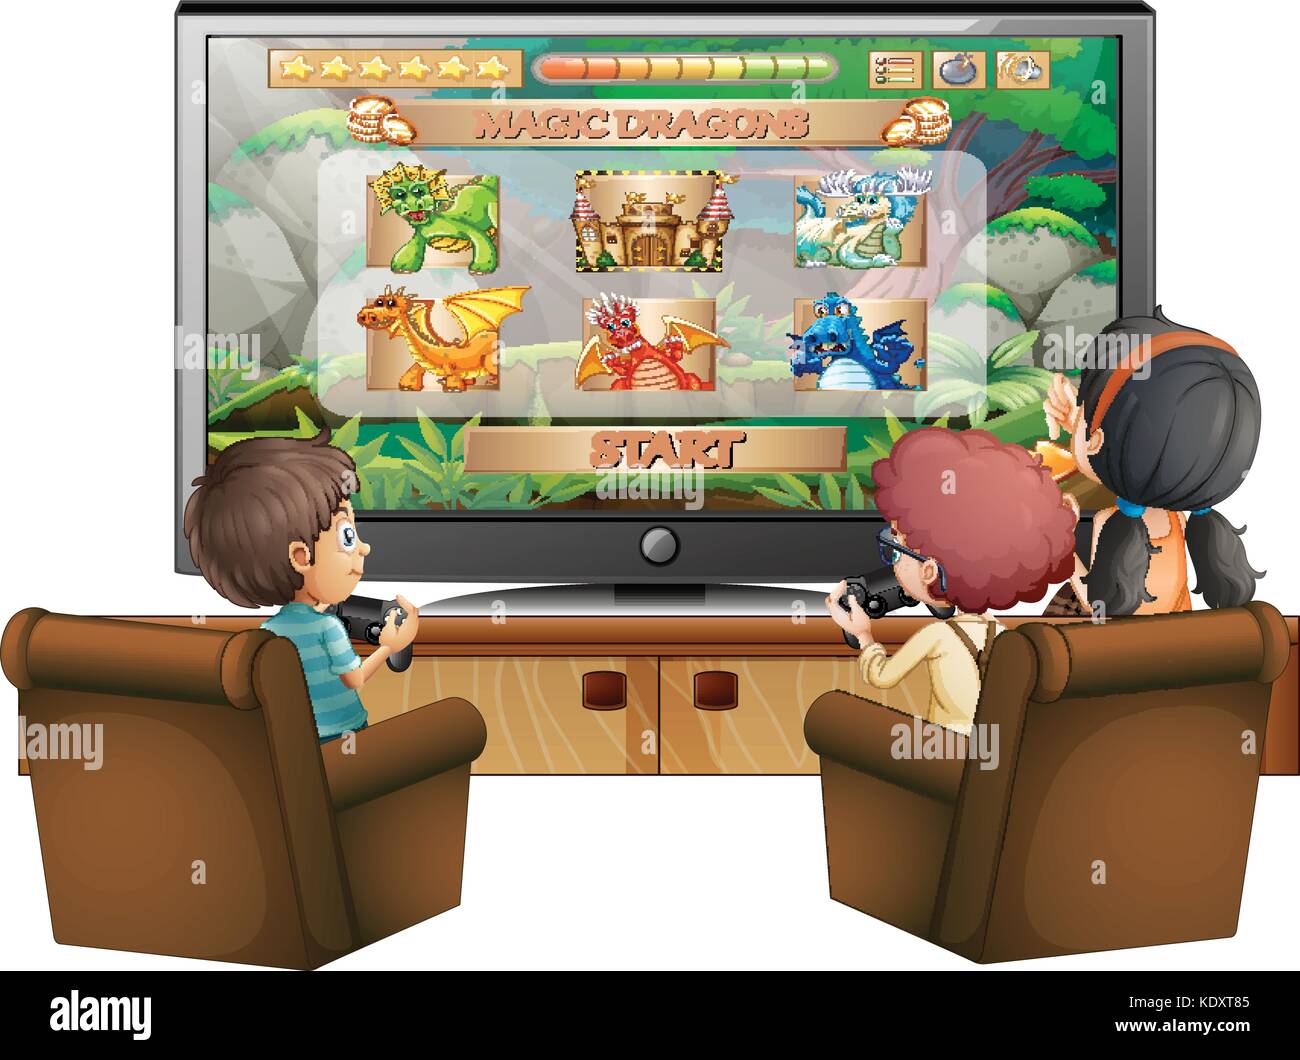 Kids playing game with big screen TV illustration Stock Vector